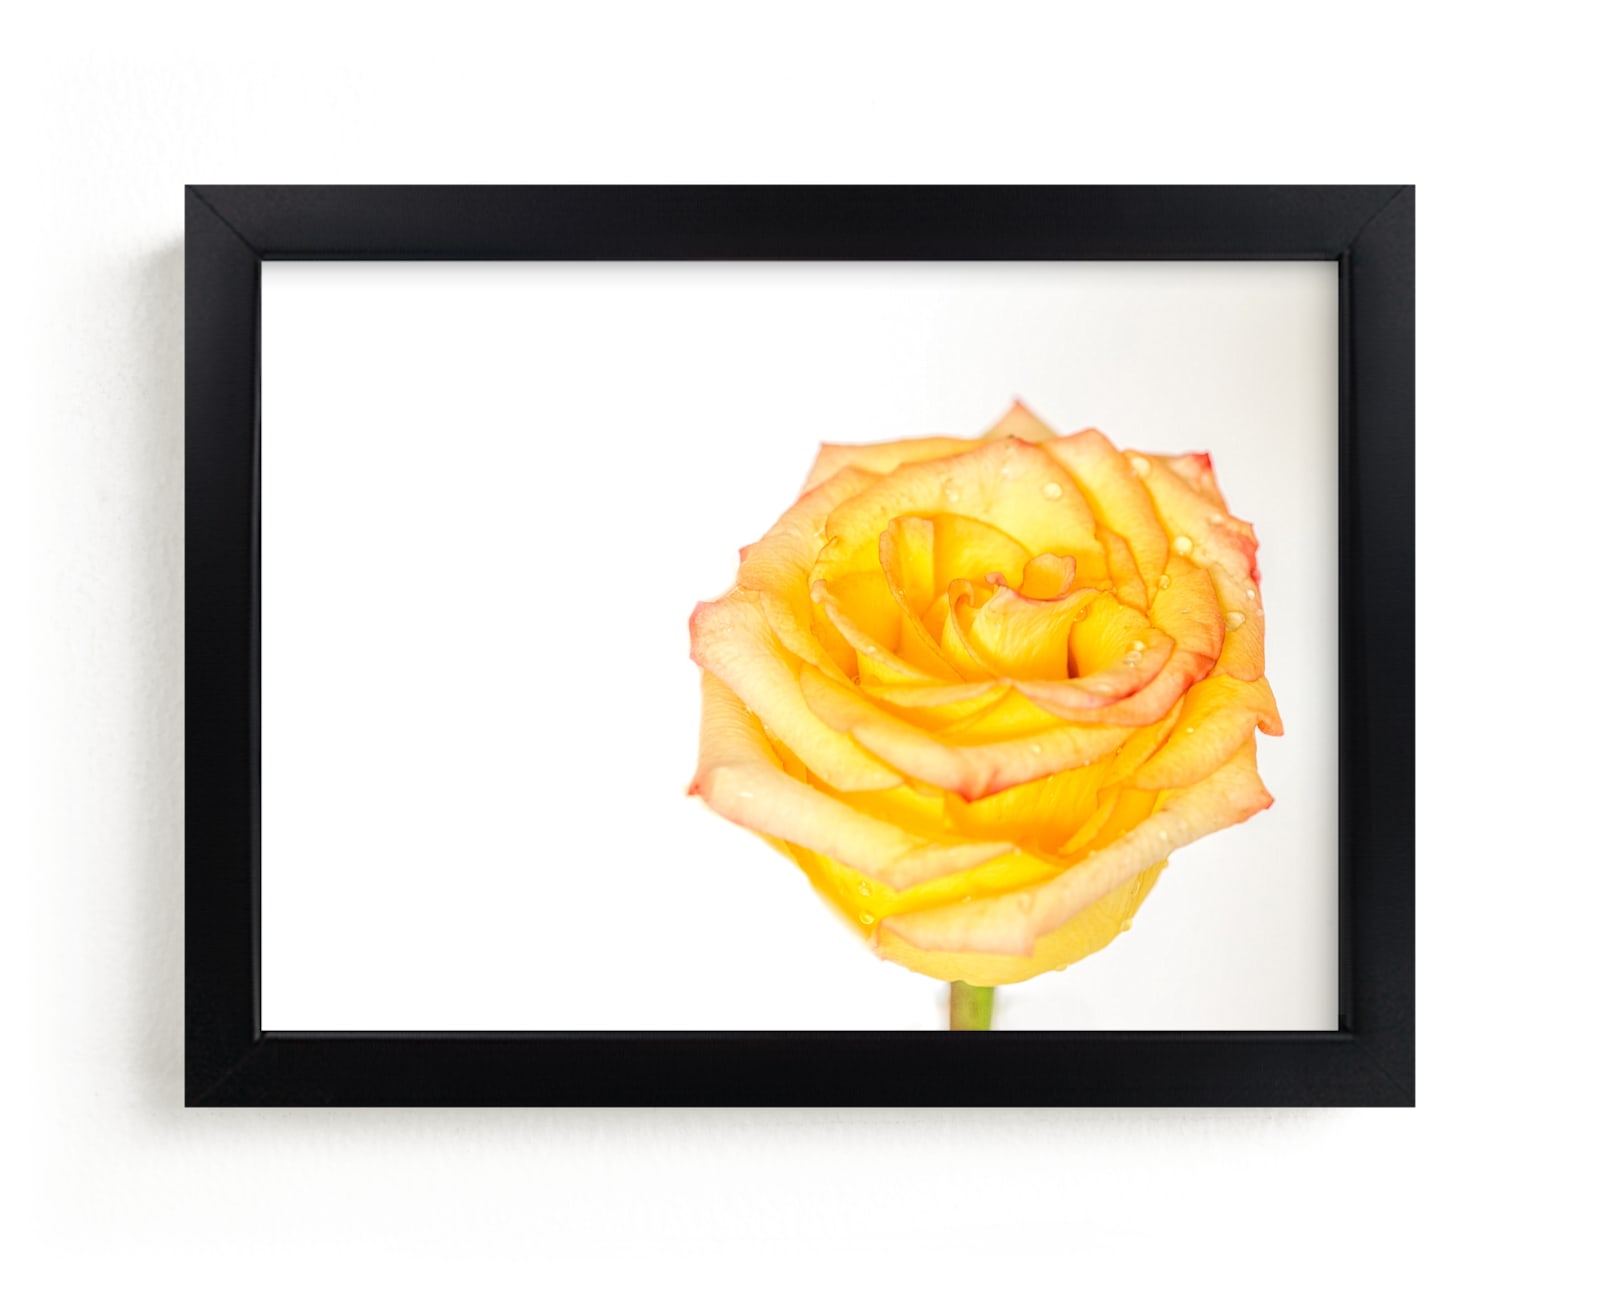 "Minimalist Beauty 2" - Art Print by Mary Ann Glynn-Tusa in beautiful frame options and a variety of sizes.